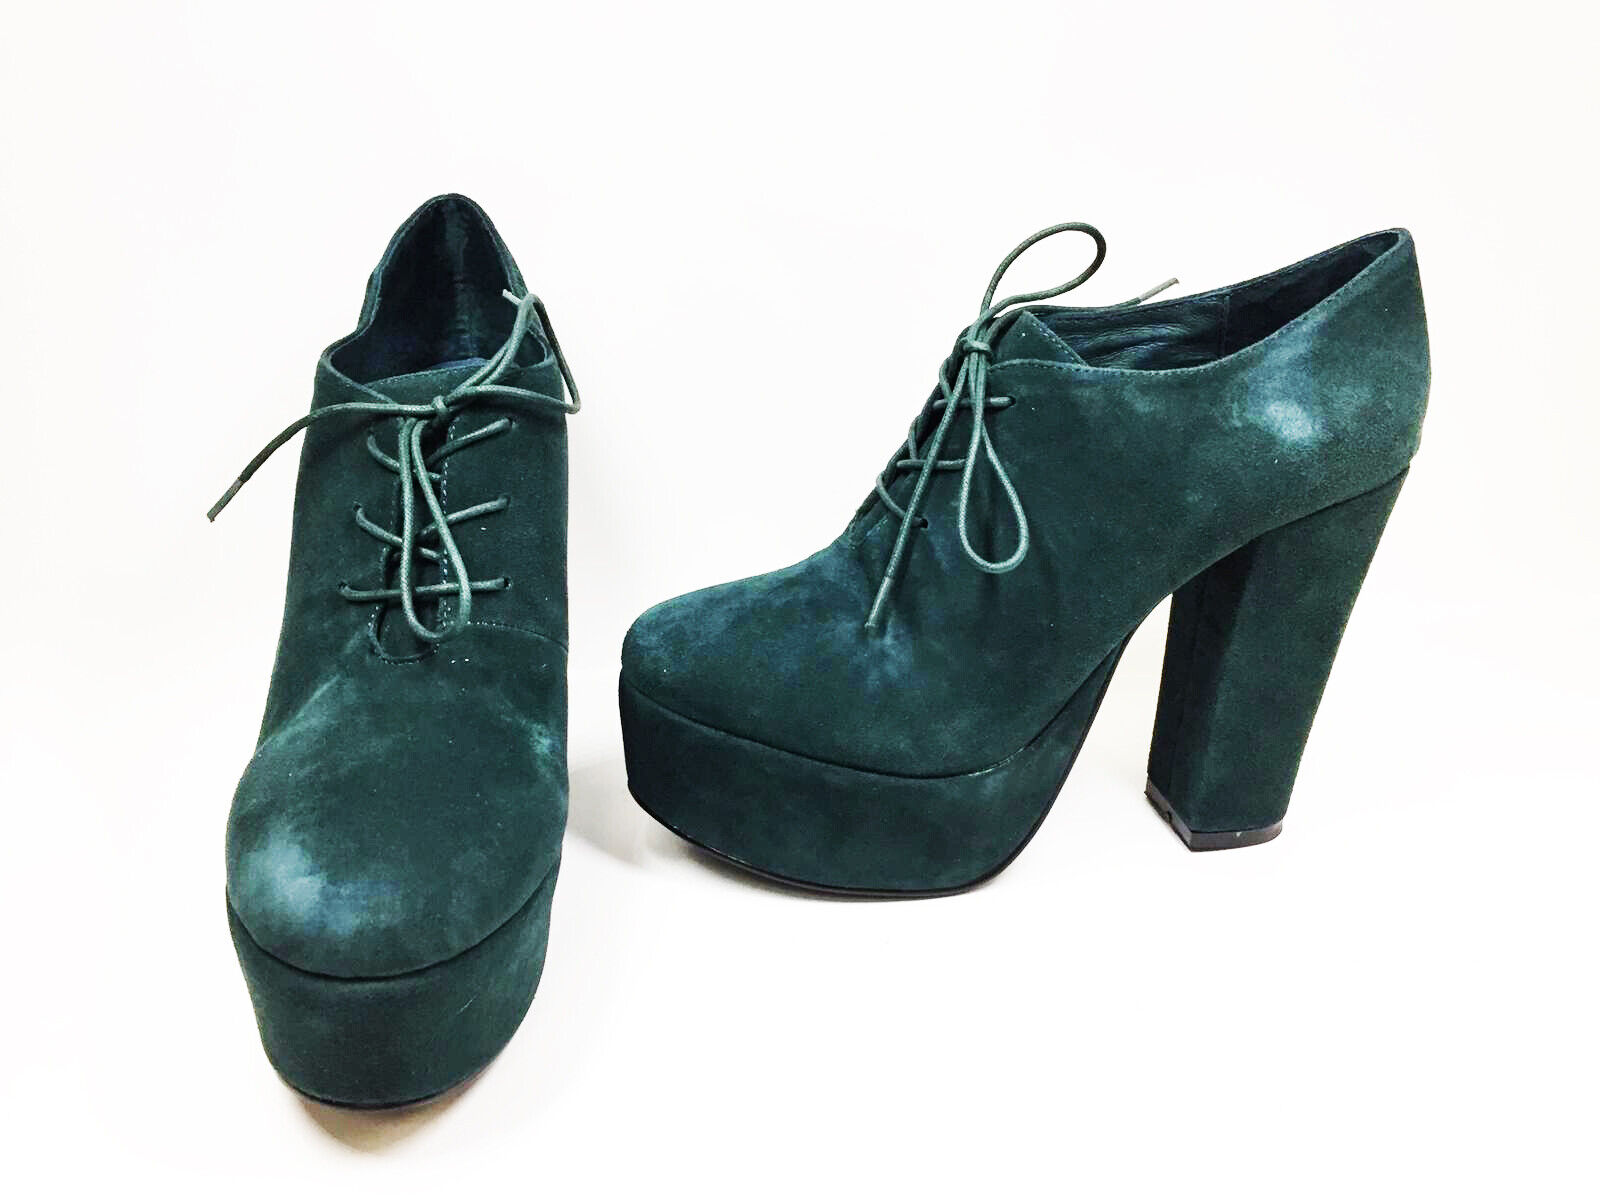 Challenge the lowest price Max 89% OFF Lothian Claire Women's Lace Up US Pumps Green Heeled 6